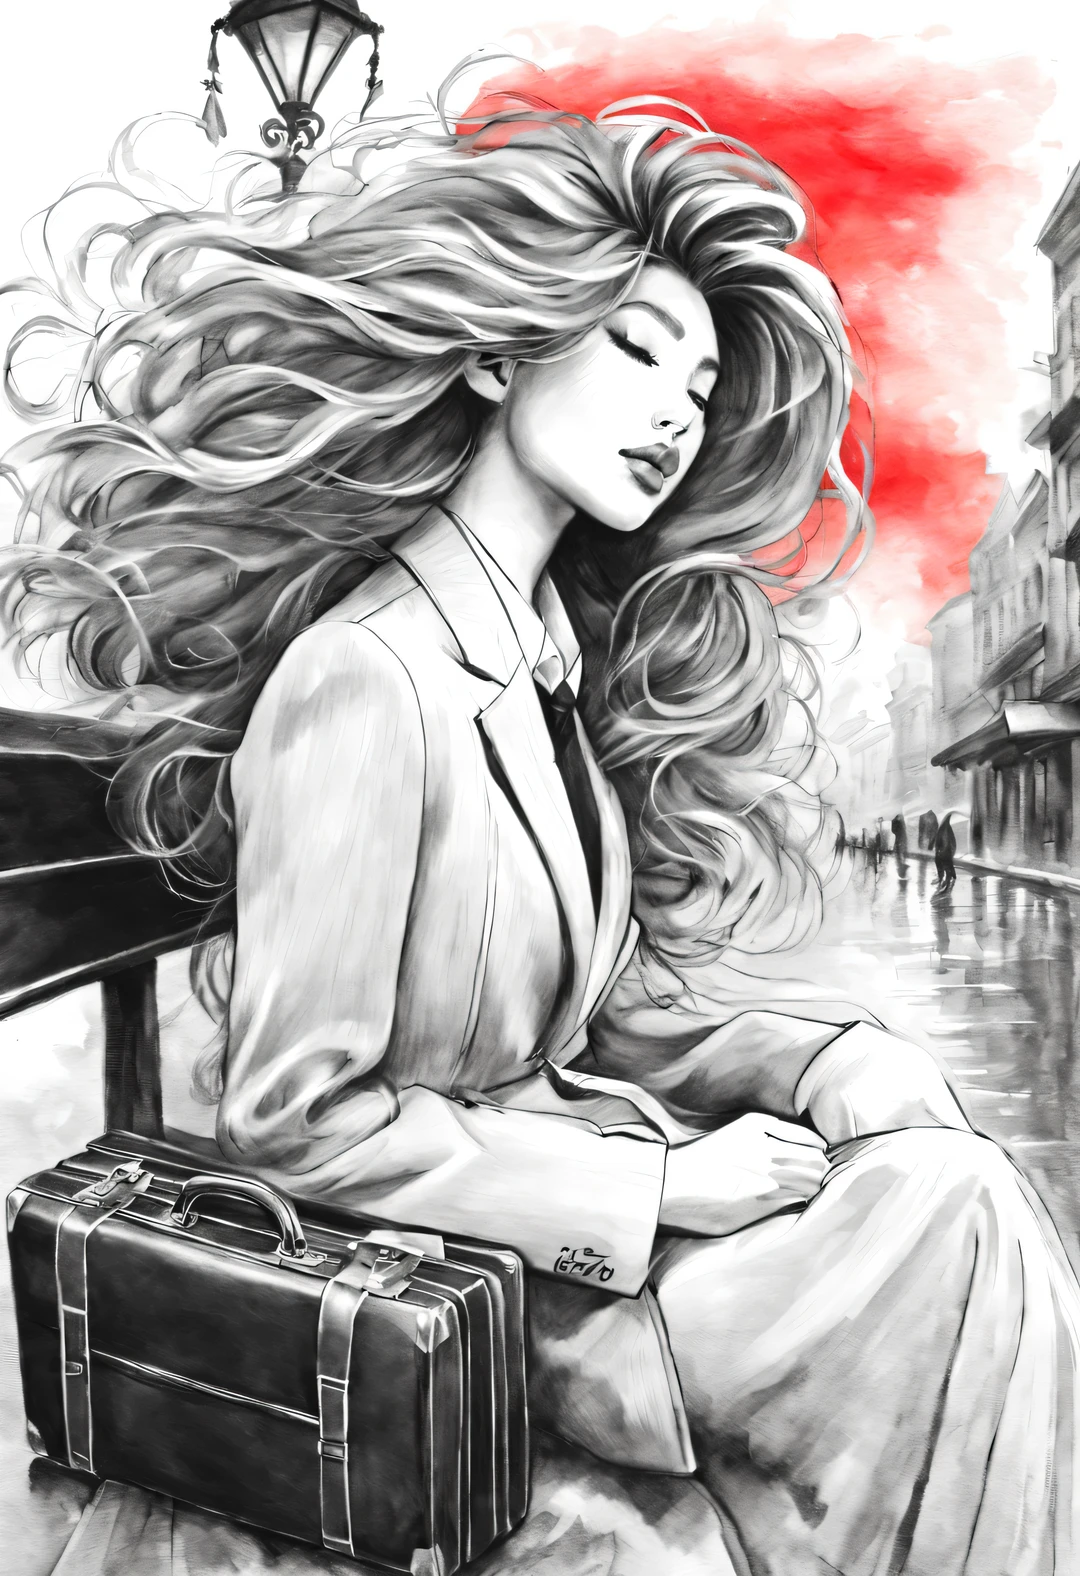 (Graphite painting), (A girl sleeps on a bench holding a briefcase: 1.0), (Messy and elegant wavy hair), (A bench on a shabby street), (Wearing a business suit and high heels), (Underfoot is an oversized briefcase), She has a young and wild Asian face, Slightly mixed face shape, (0.4 Located in Lower Paris), (Beautiful red mouth), high nose, Her hair is smooth and layered, ( and expression: 0.65), Only the street lights glow red, The background is a stormy night, (fly in the sky) many newspapers),
90's anime style, contour, Graphic arts, line art, black and white, line art with pen pressure, Pen pressure sketch, Calligraphy pen with pen pressure, G pen style，With pen pressure, bold hand drawn lines, high contrast, CG model,